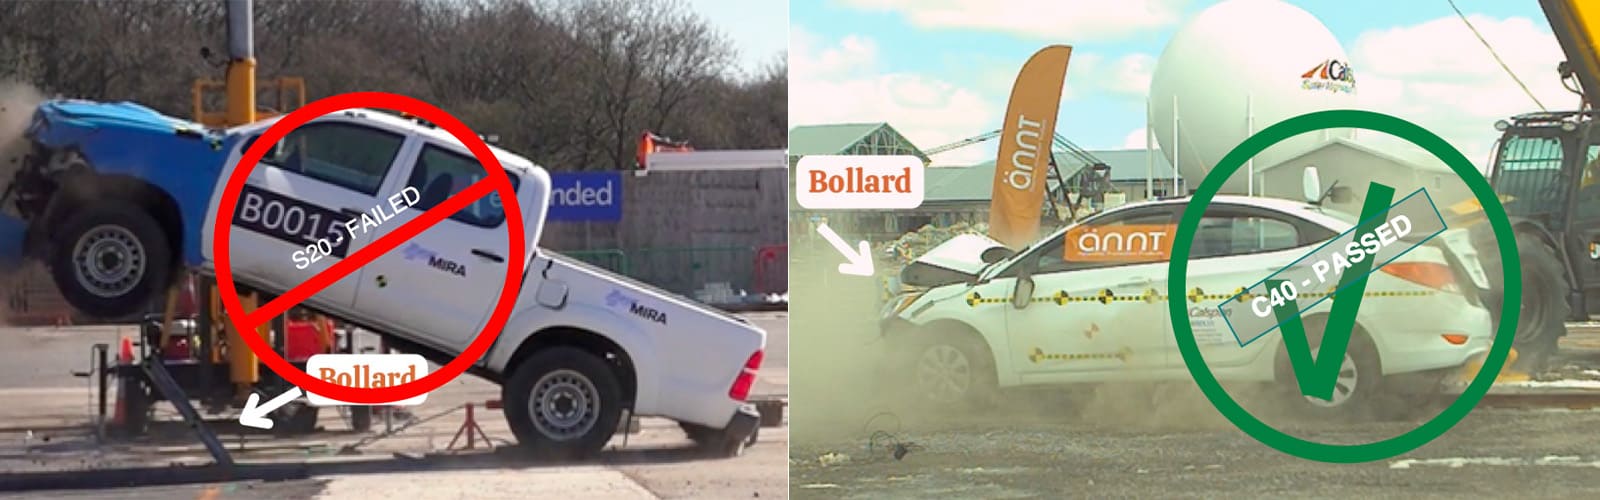 comparing the S20 bollard to the C40 bollard in a crash test. The S20 failed and the C40 passed.